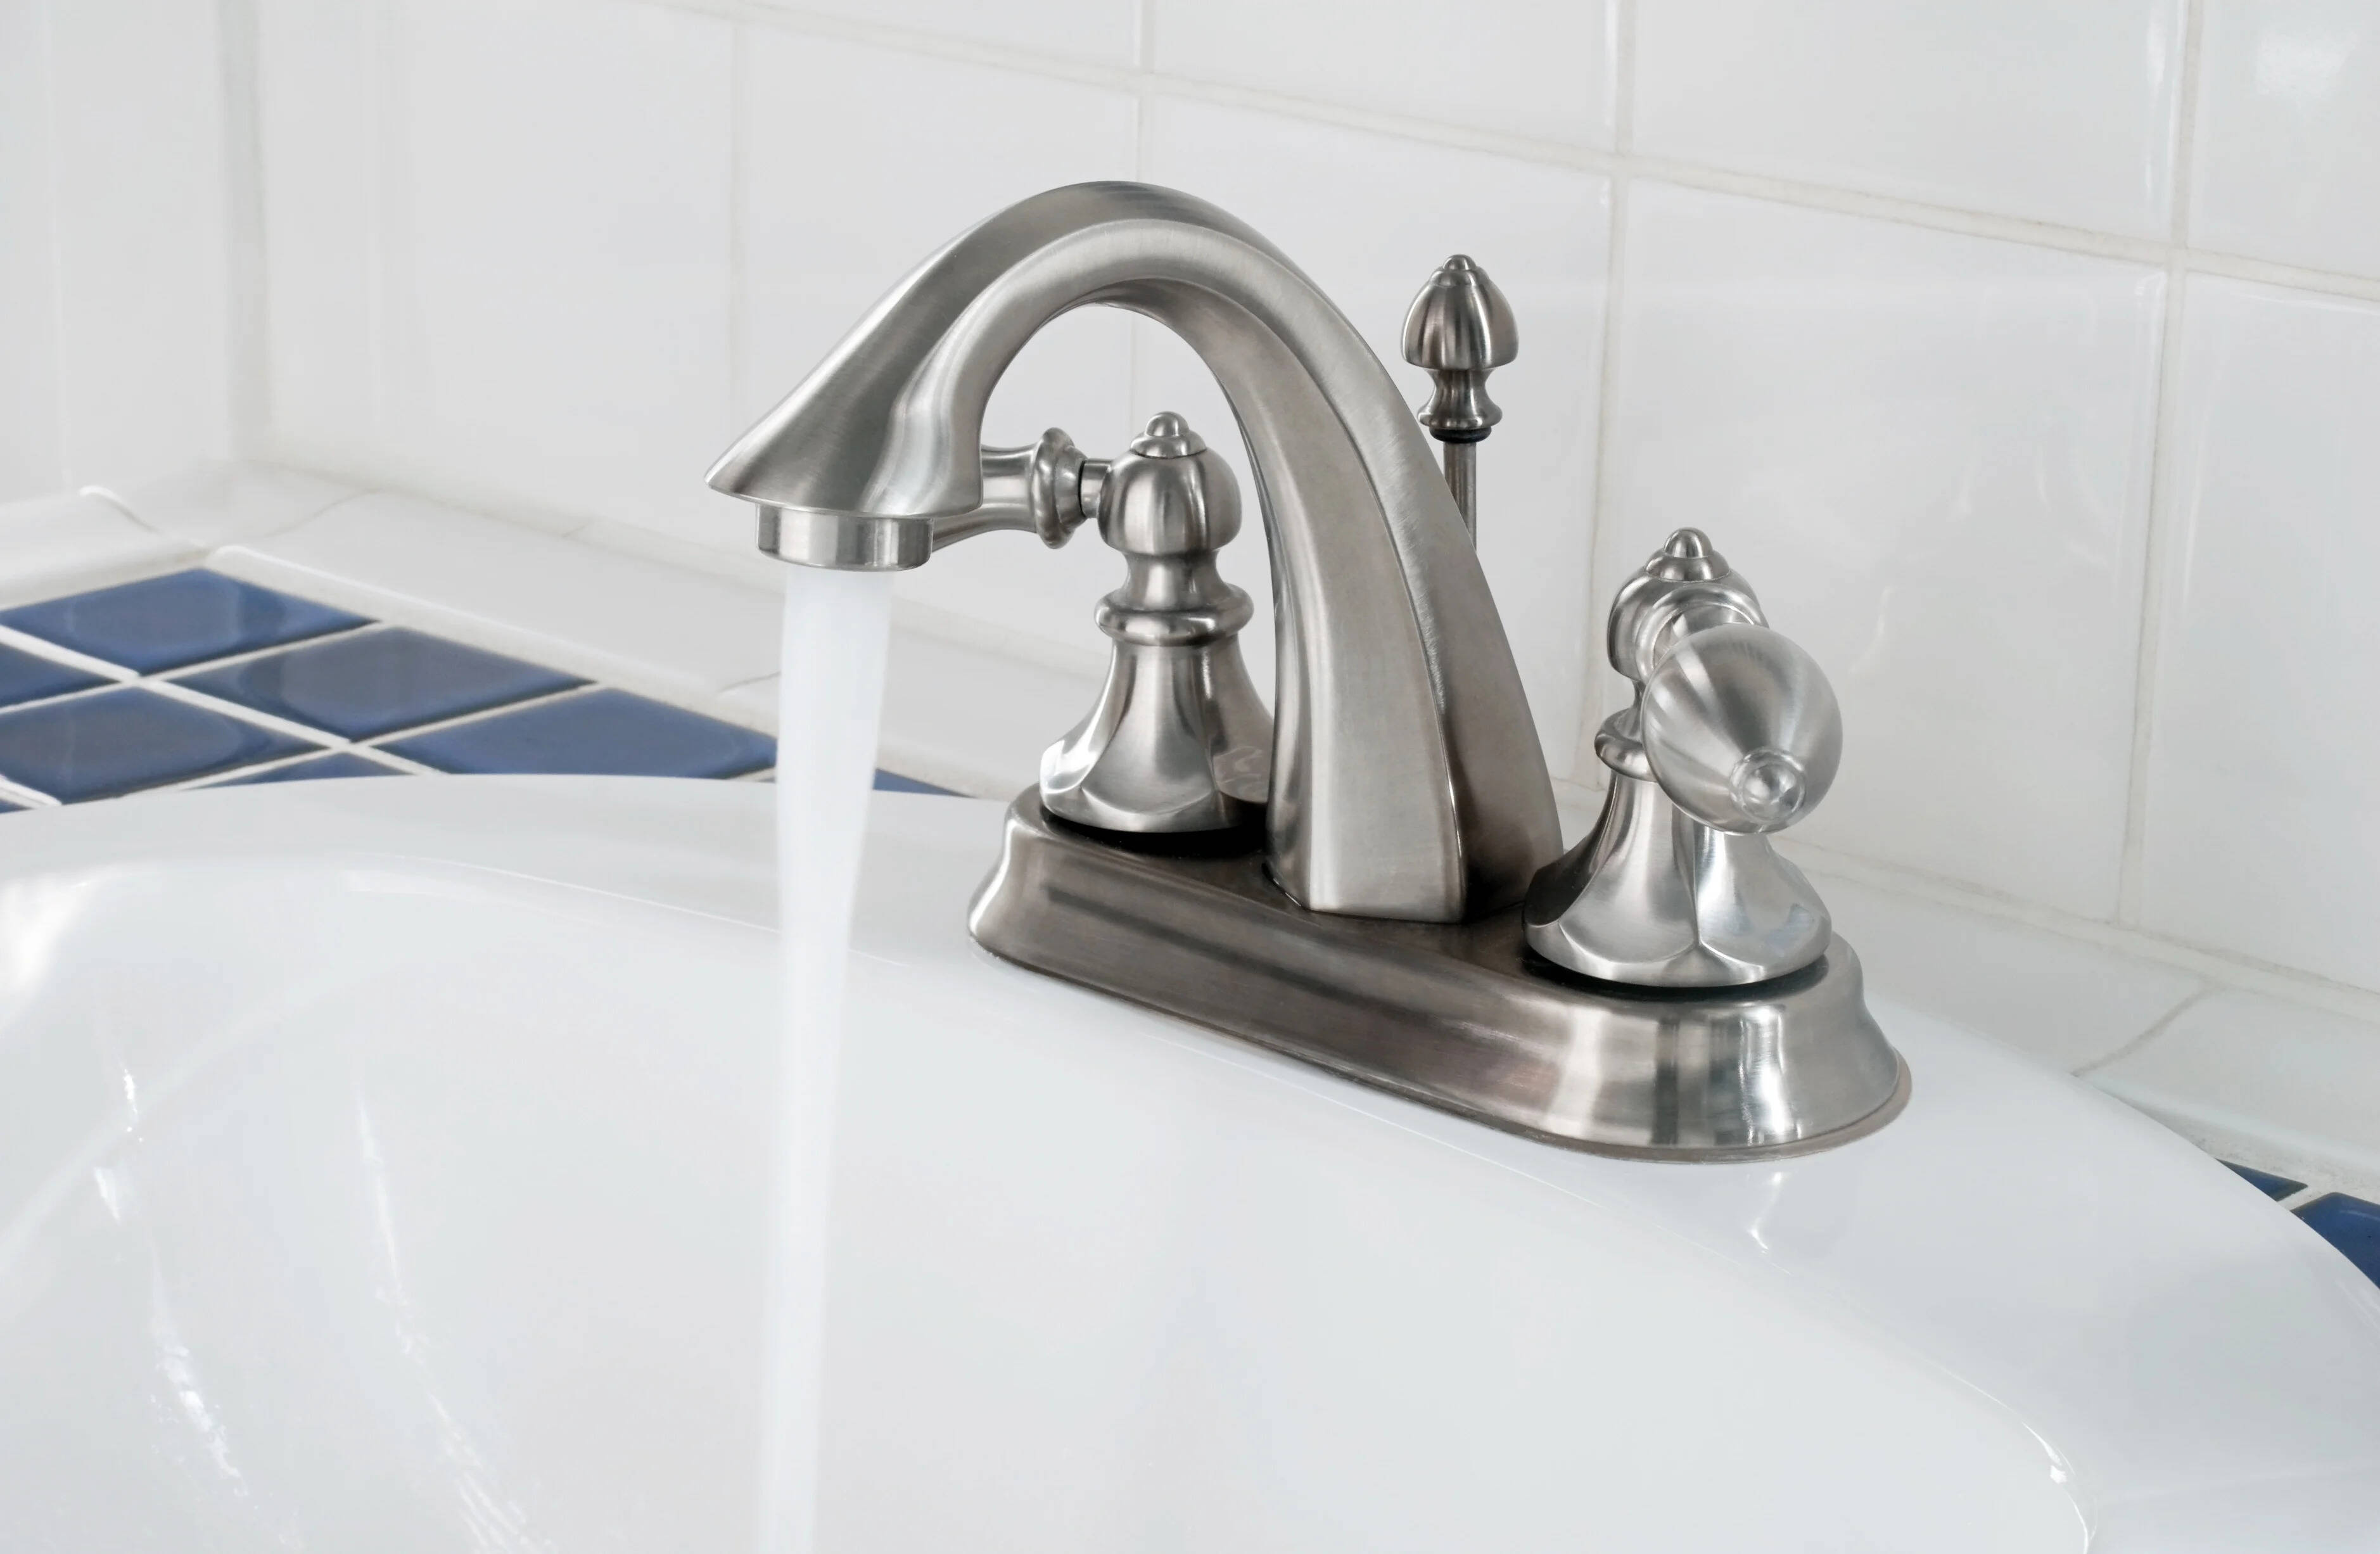 How To Tighten Loose Faucet Handle